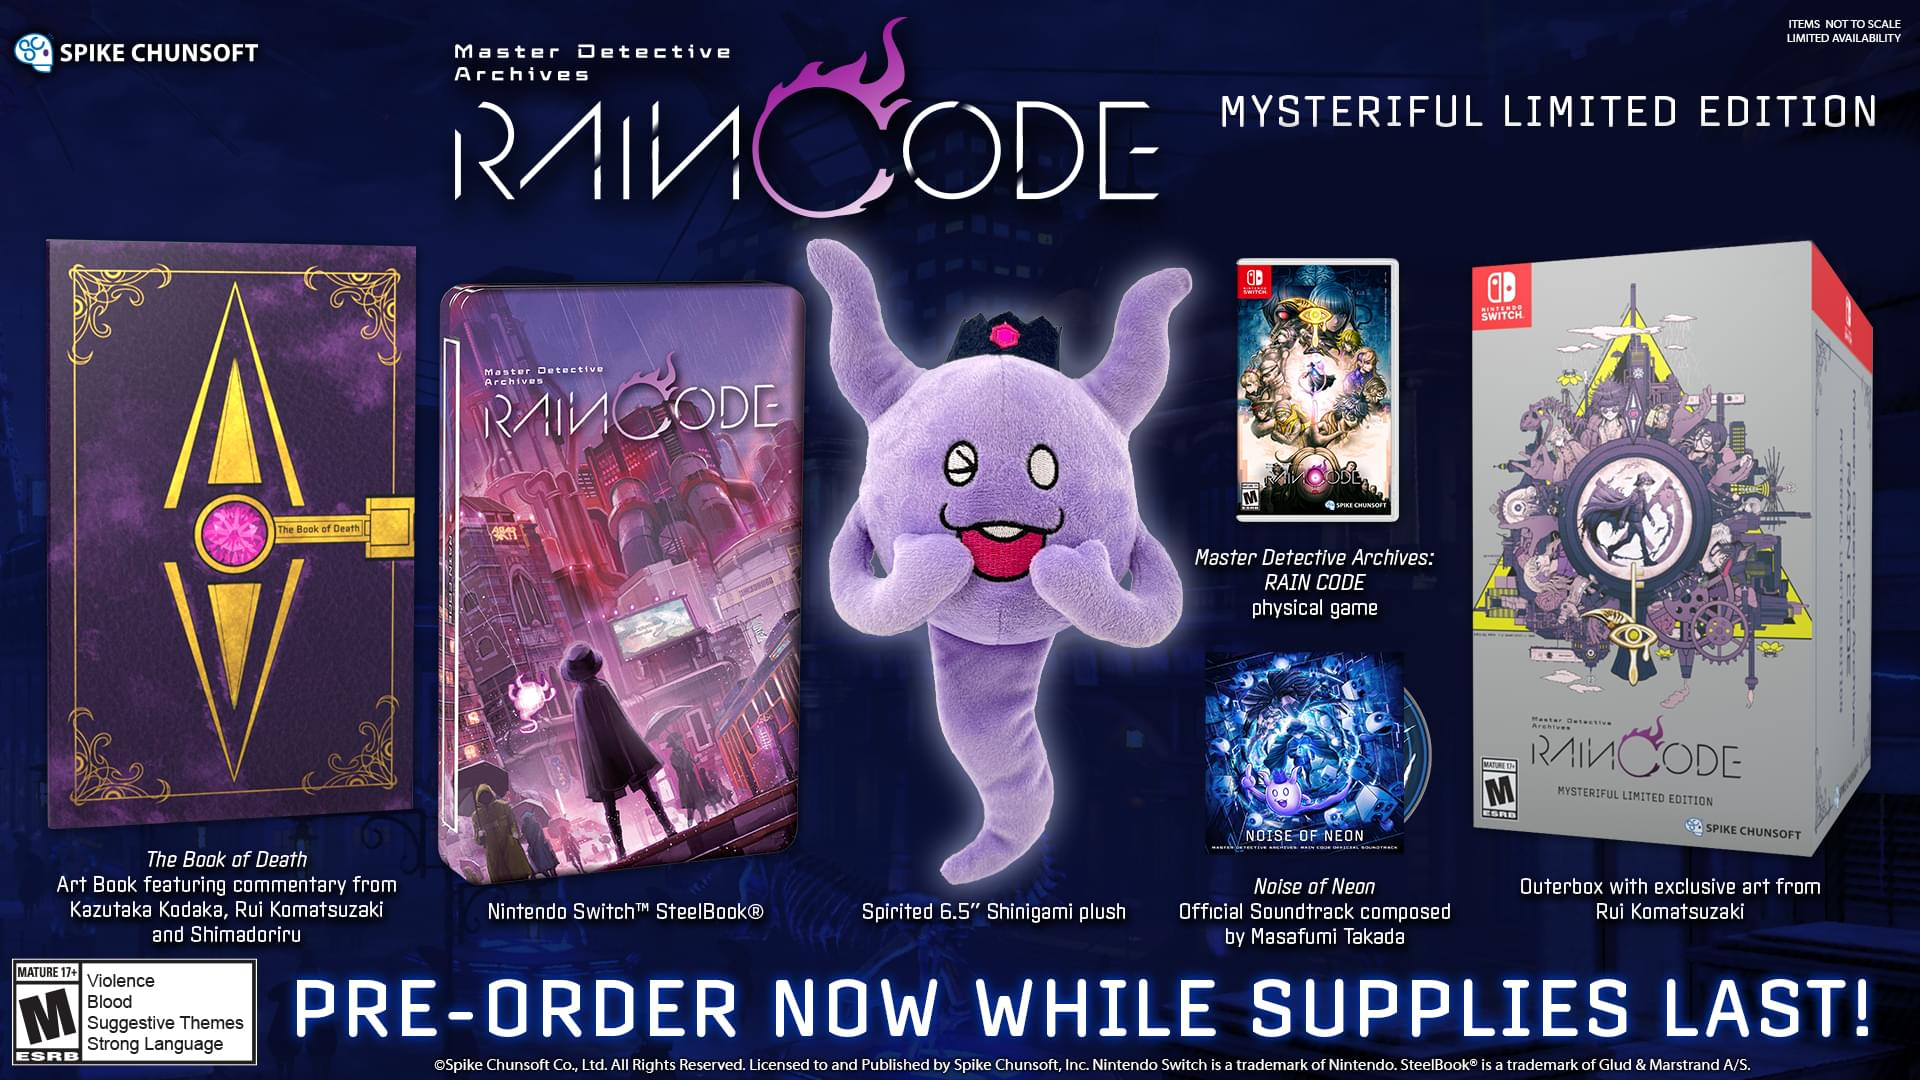 Master Detective Archives: RAIN CODE - Mysteriful limited edition